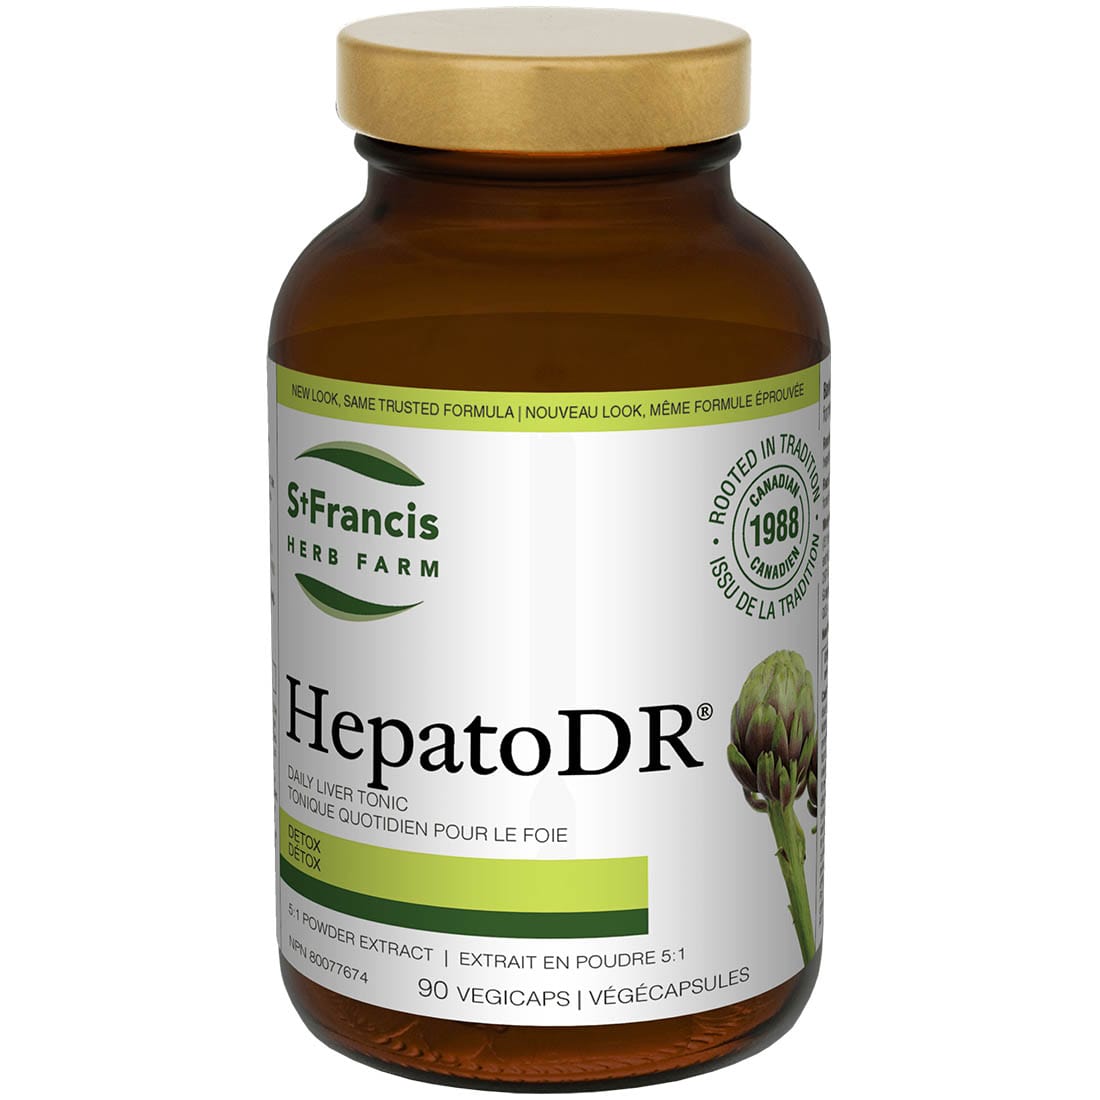 St. Francis Hepato DR, 5:1 Extract, 90 Capsules